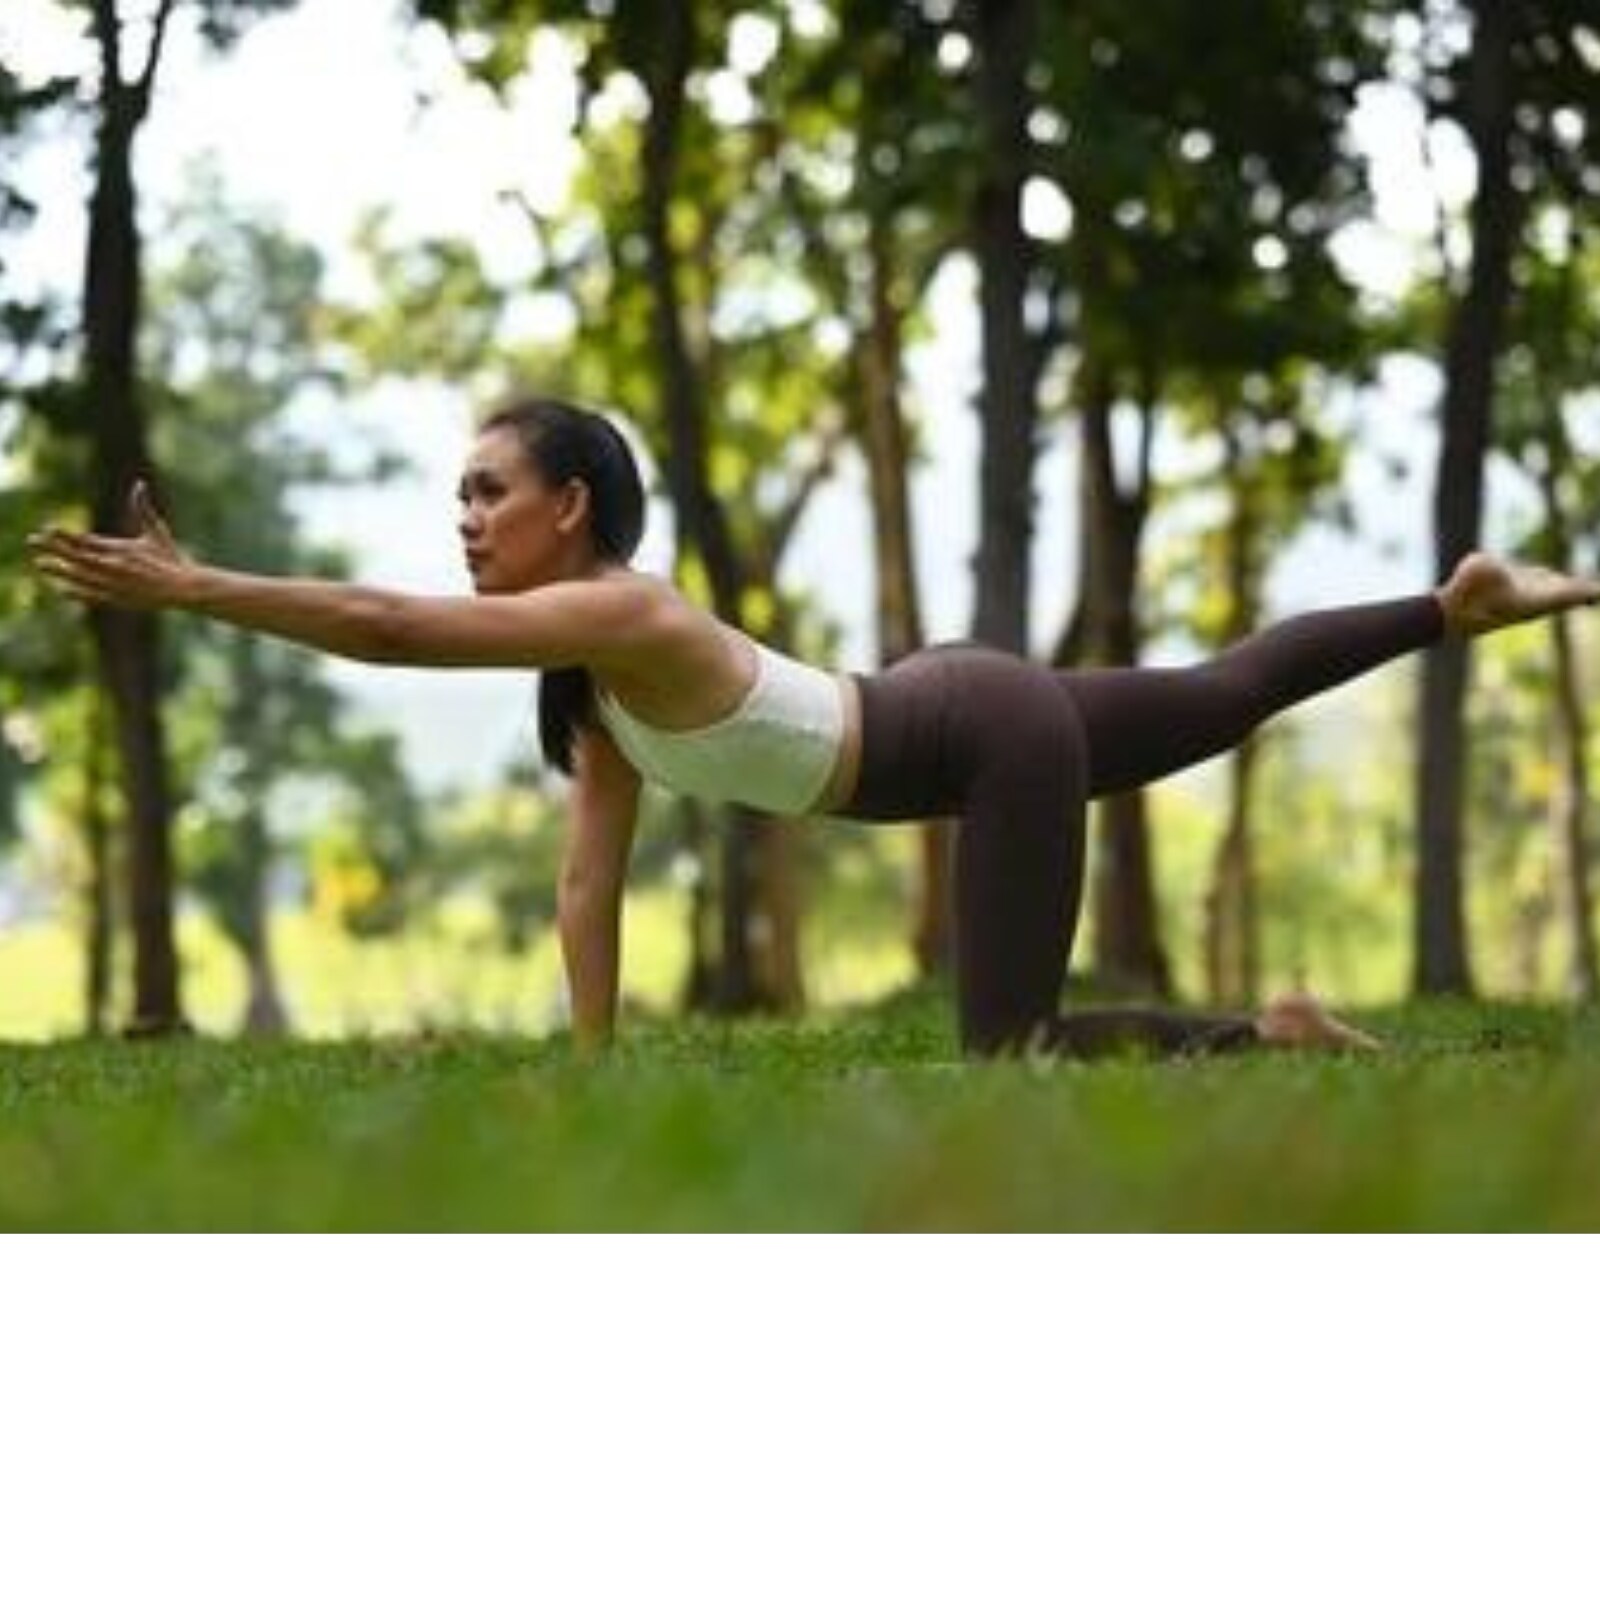 Yoga for neck pain: 7 stretching exercises for pain relief | HealthShots